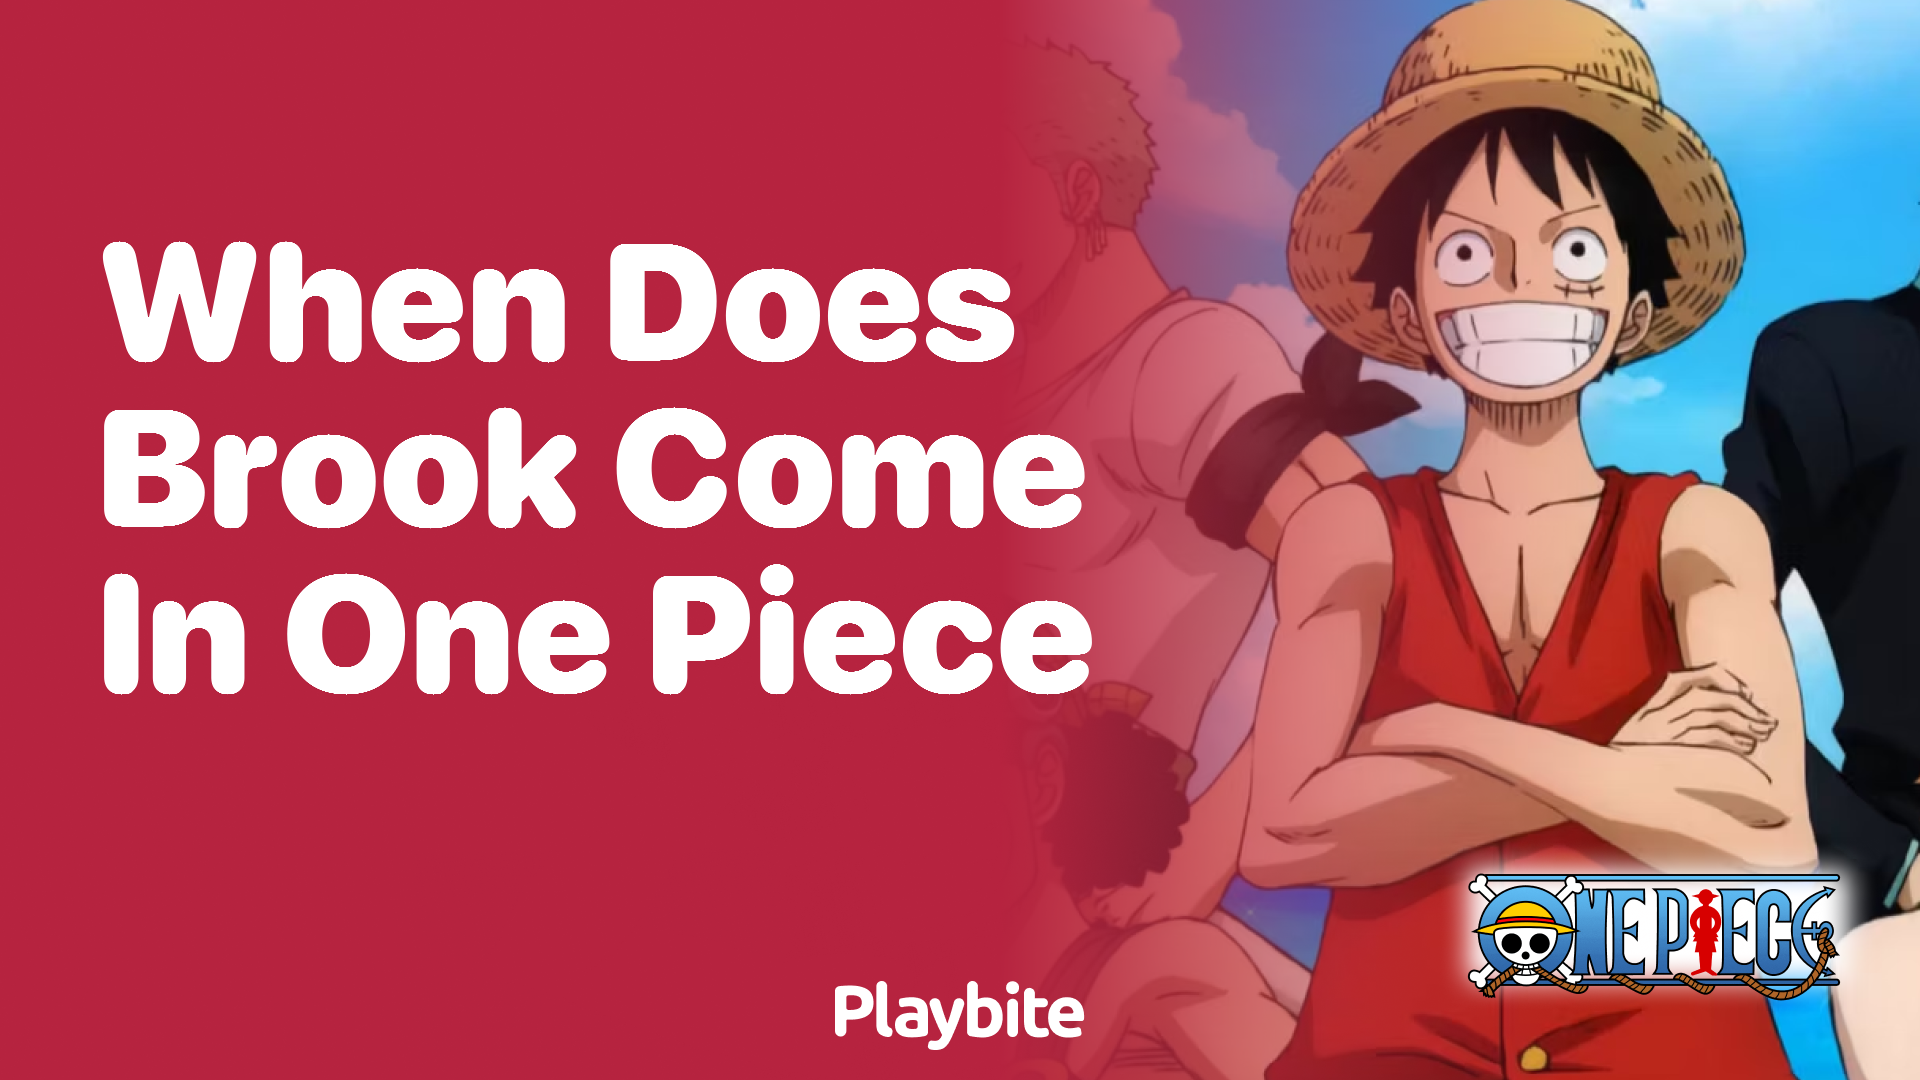 When Does Brook Come Into One Piece?